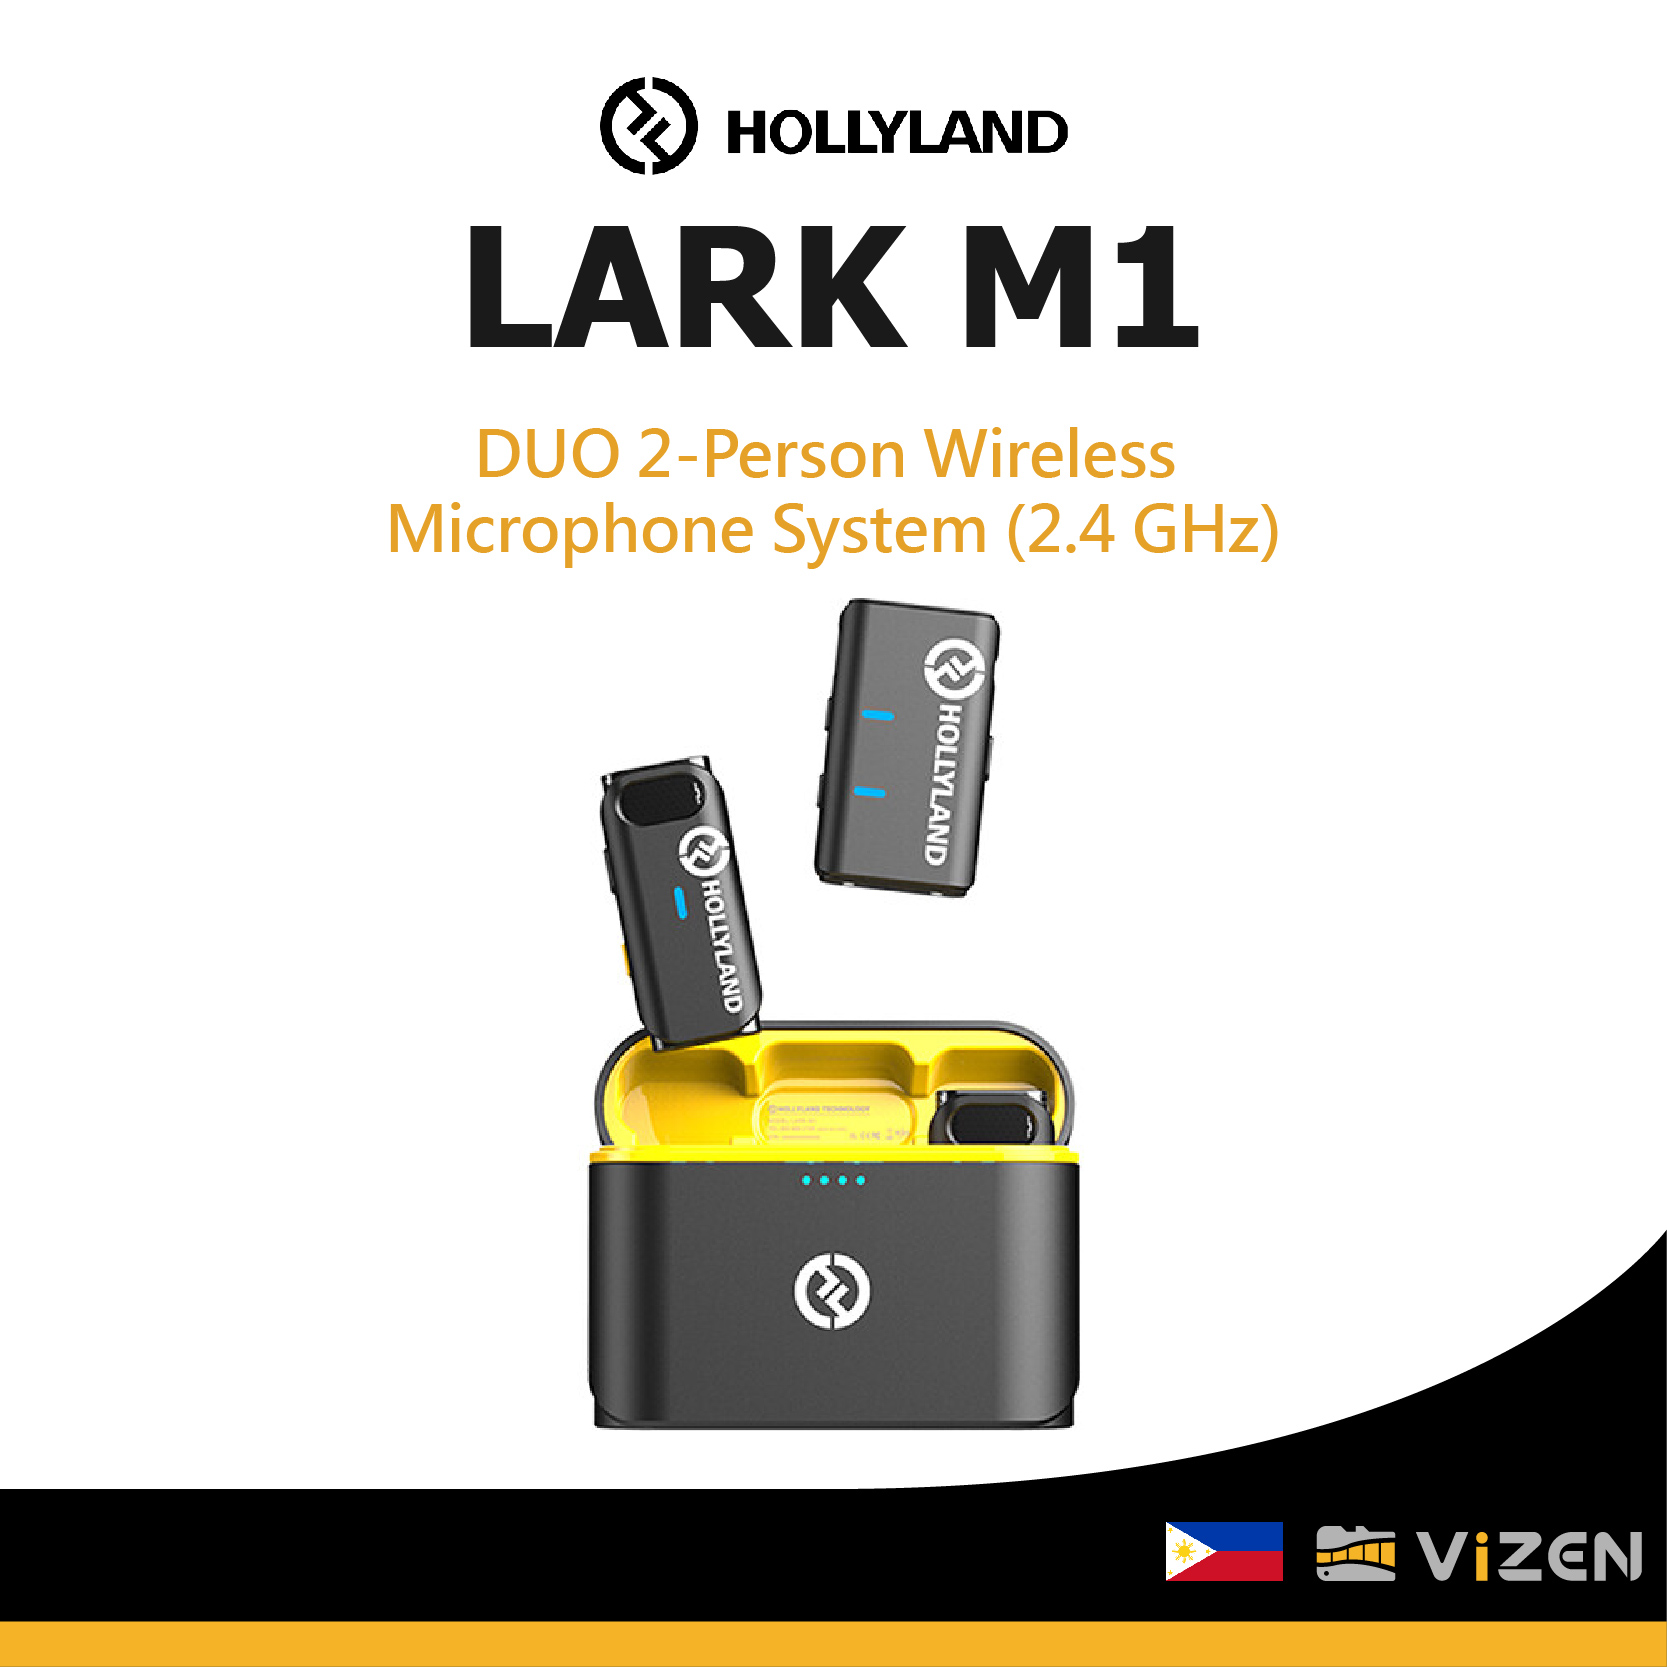 Hollyland LARK M1 DUO 2-Person Wireless Microphone System 2.4 GHz